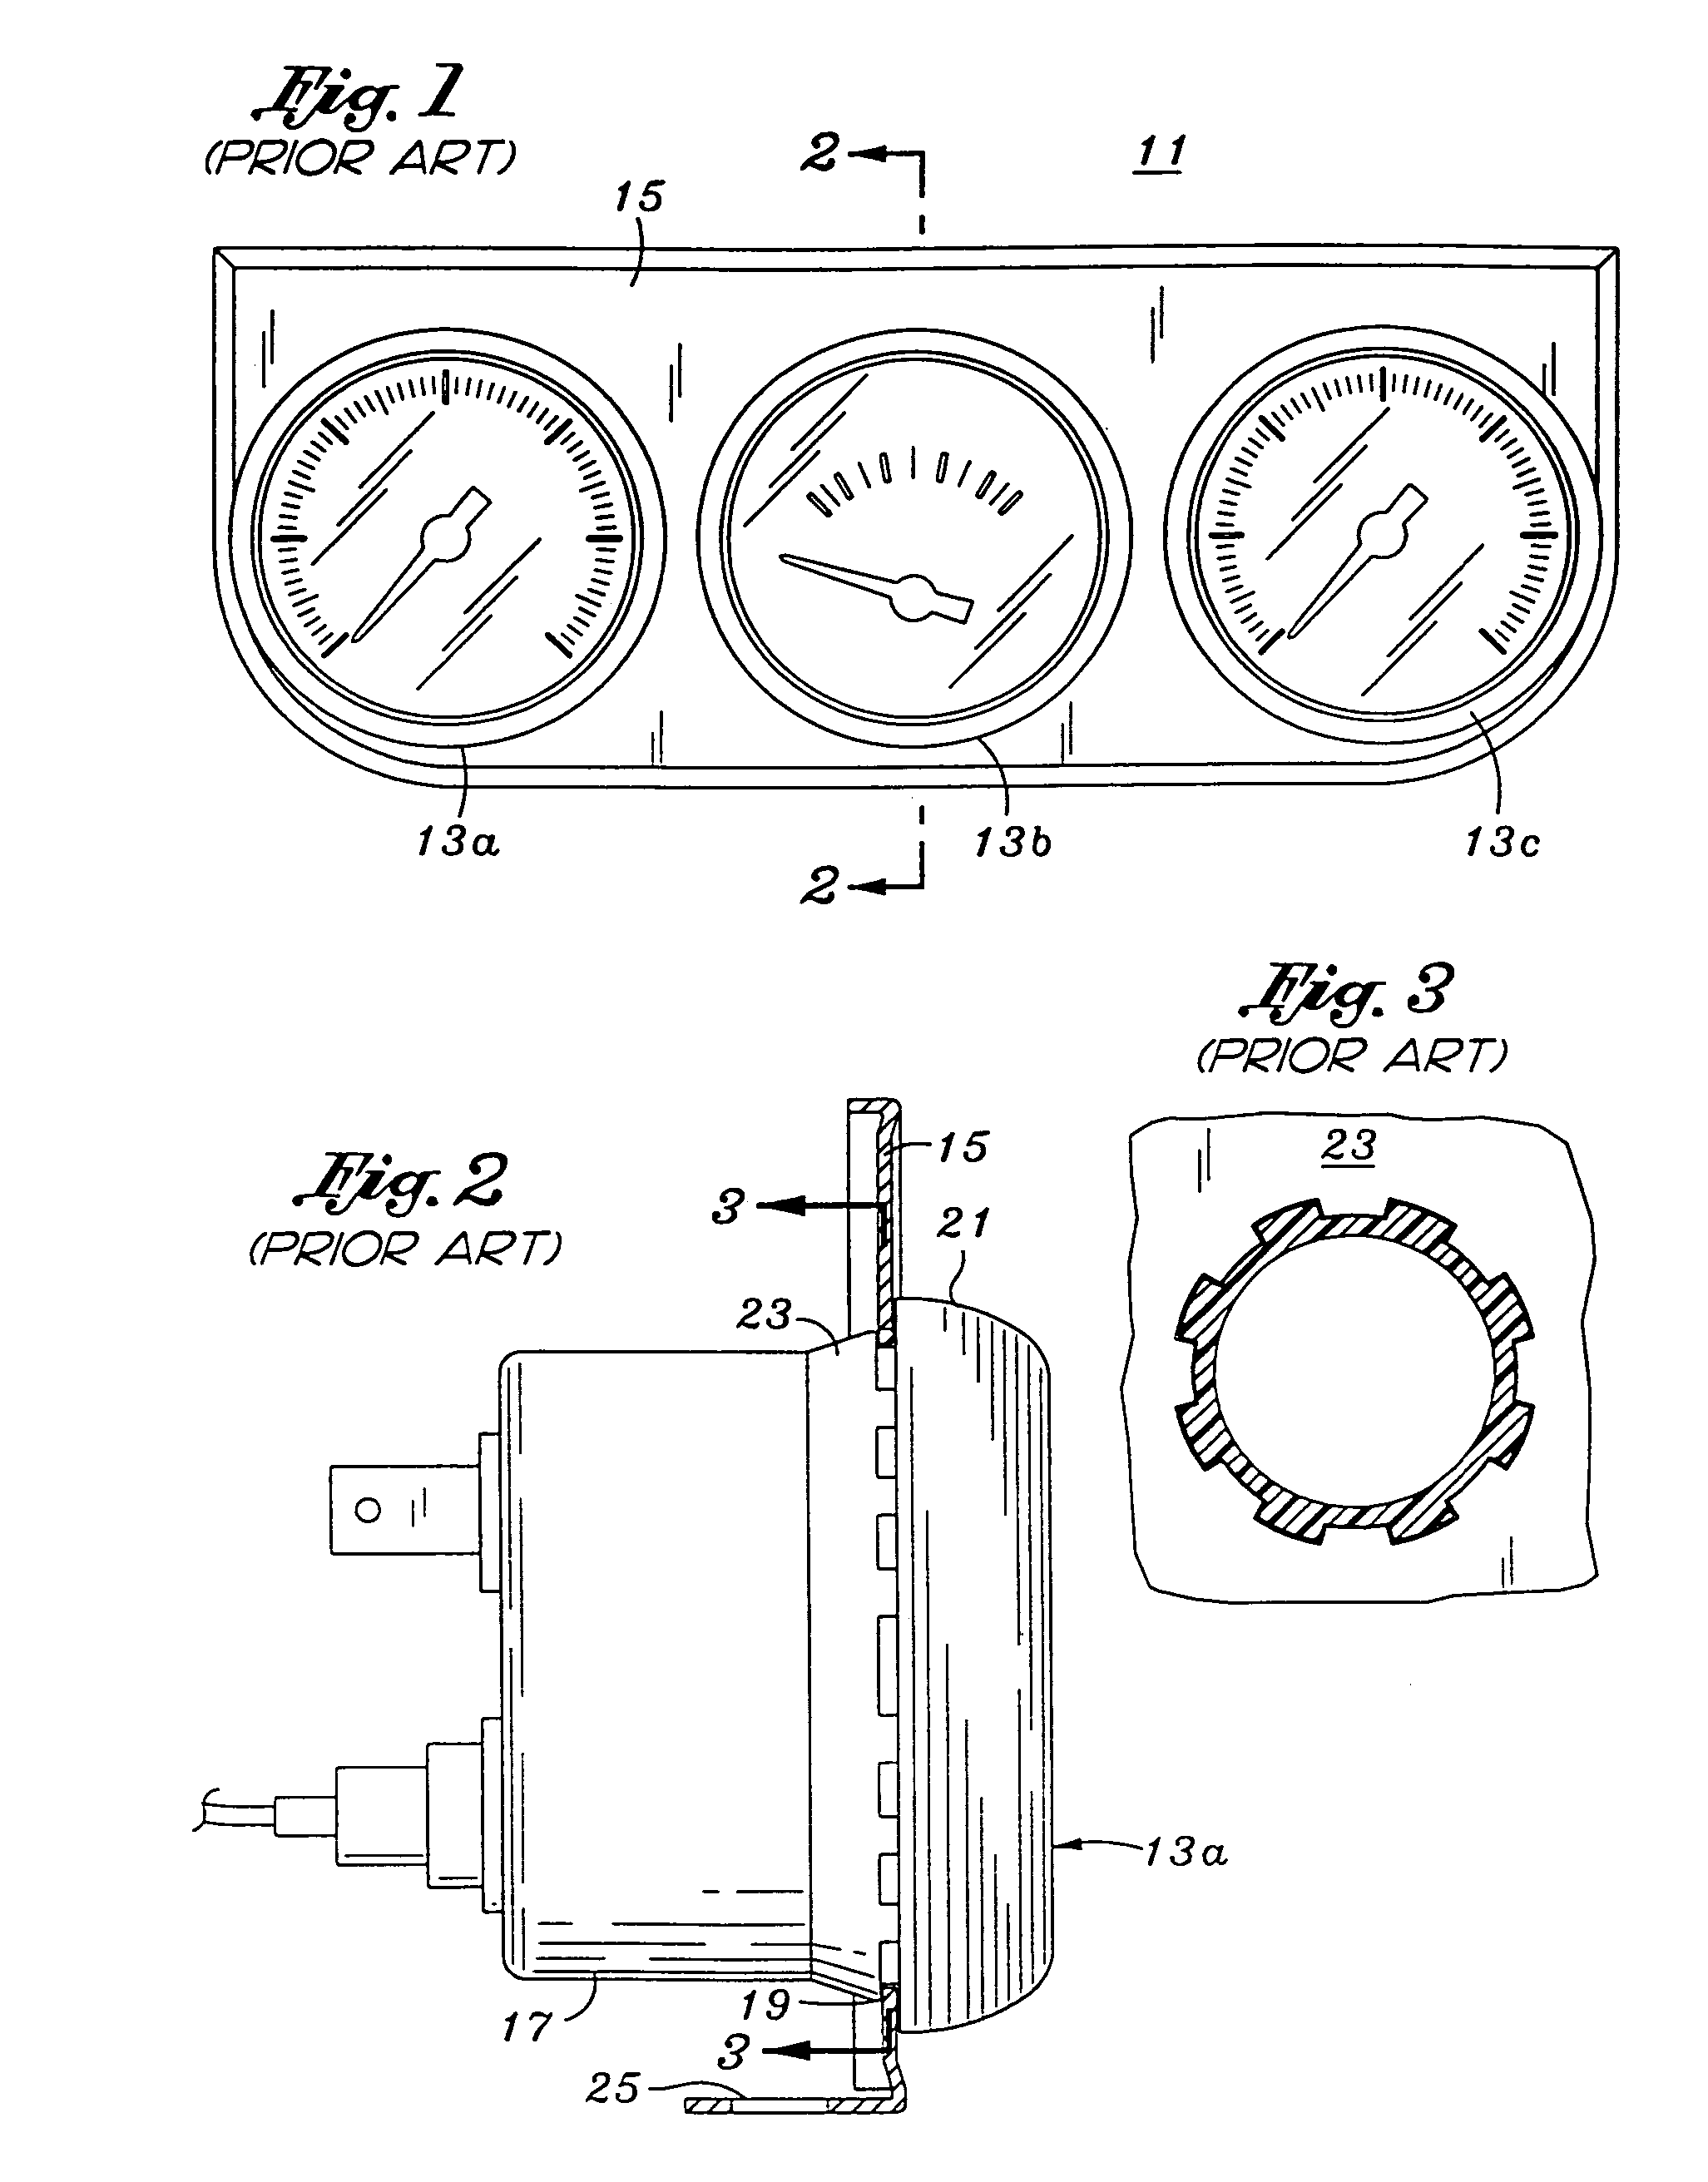 Automotive gauge mounting bracket with frictional fit apertures